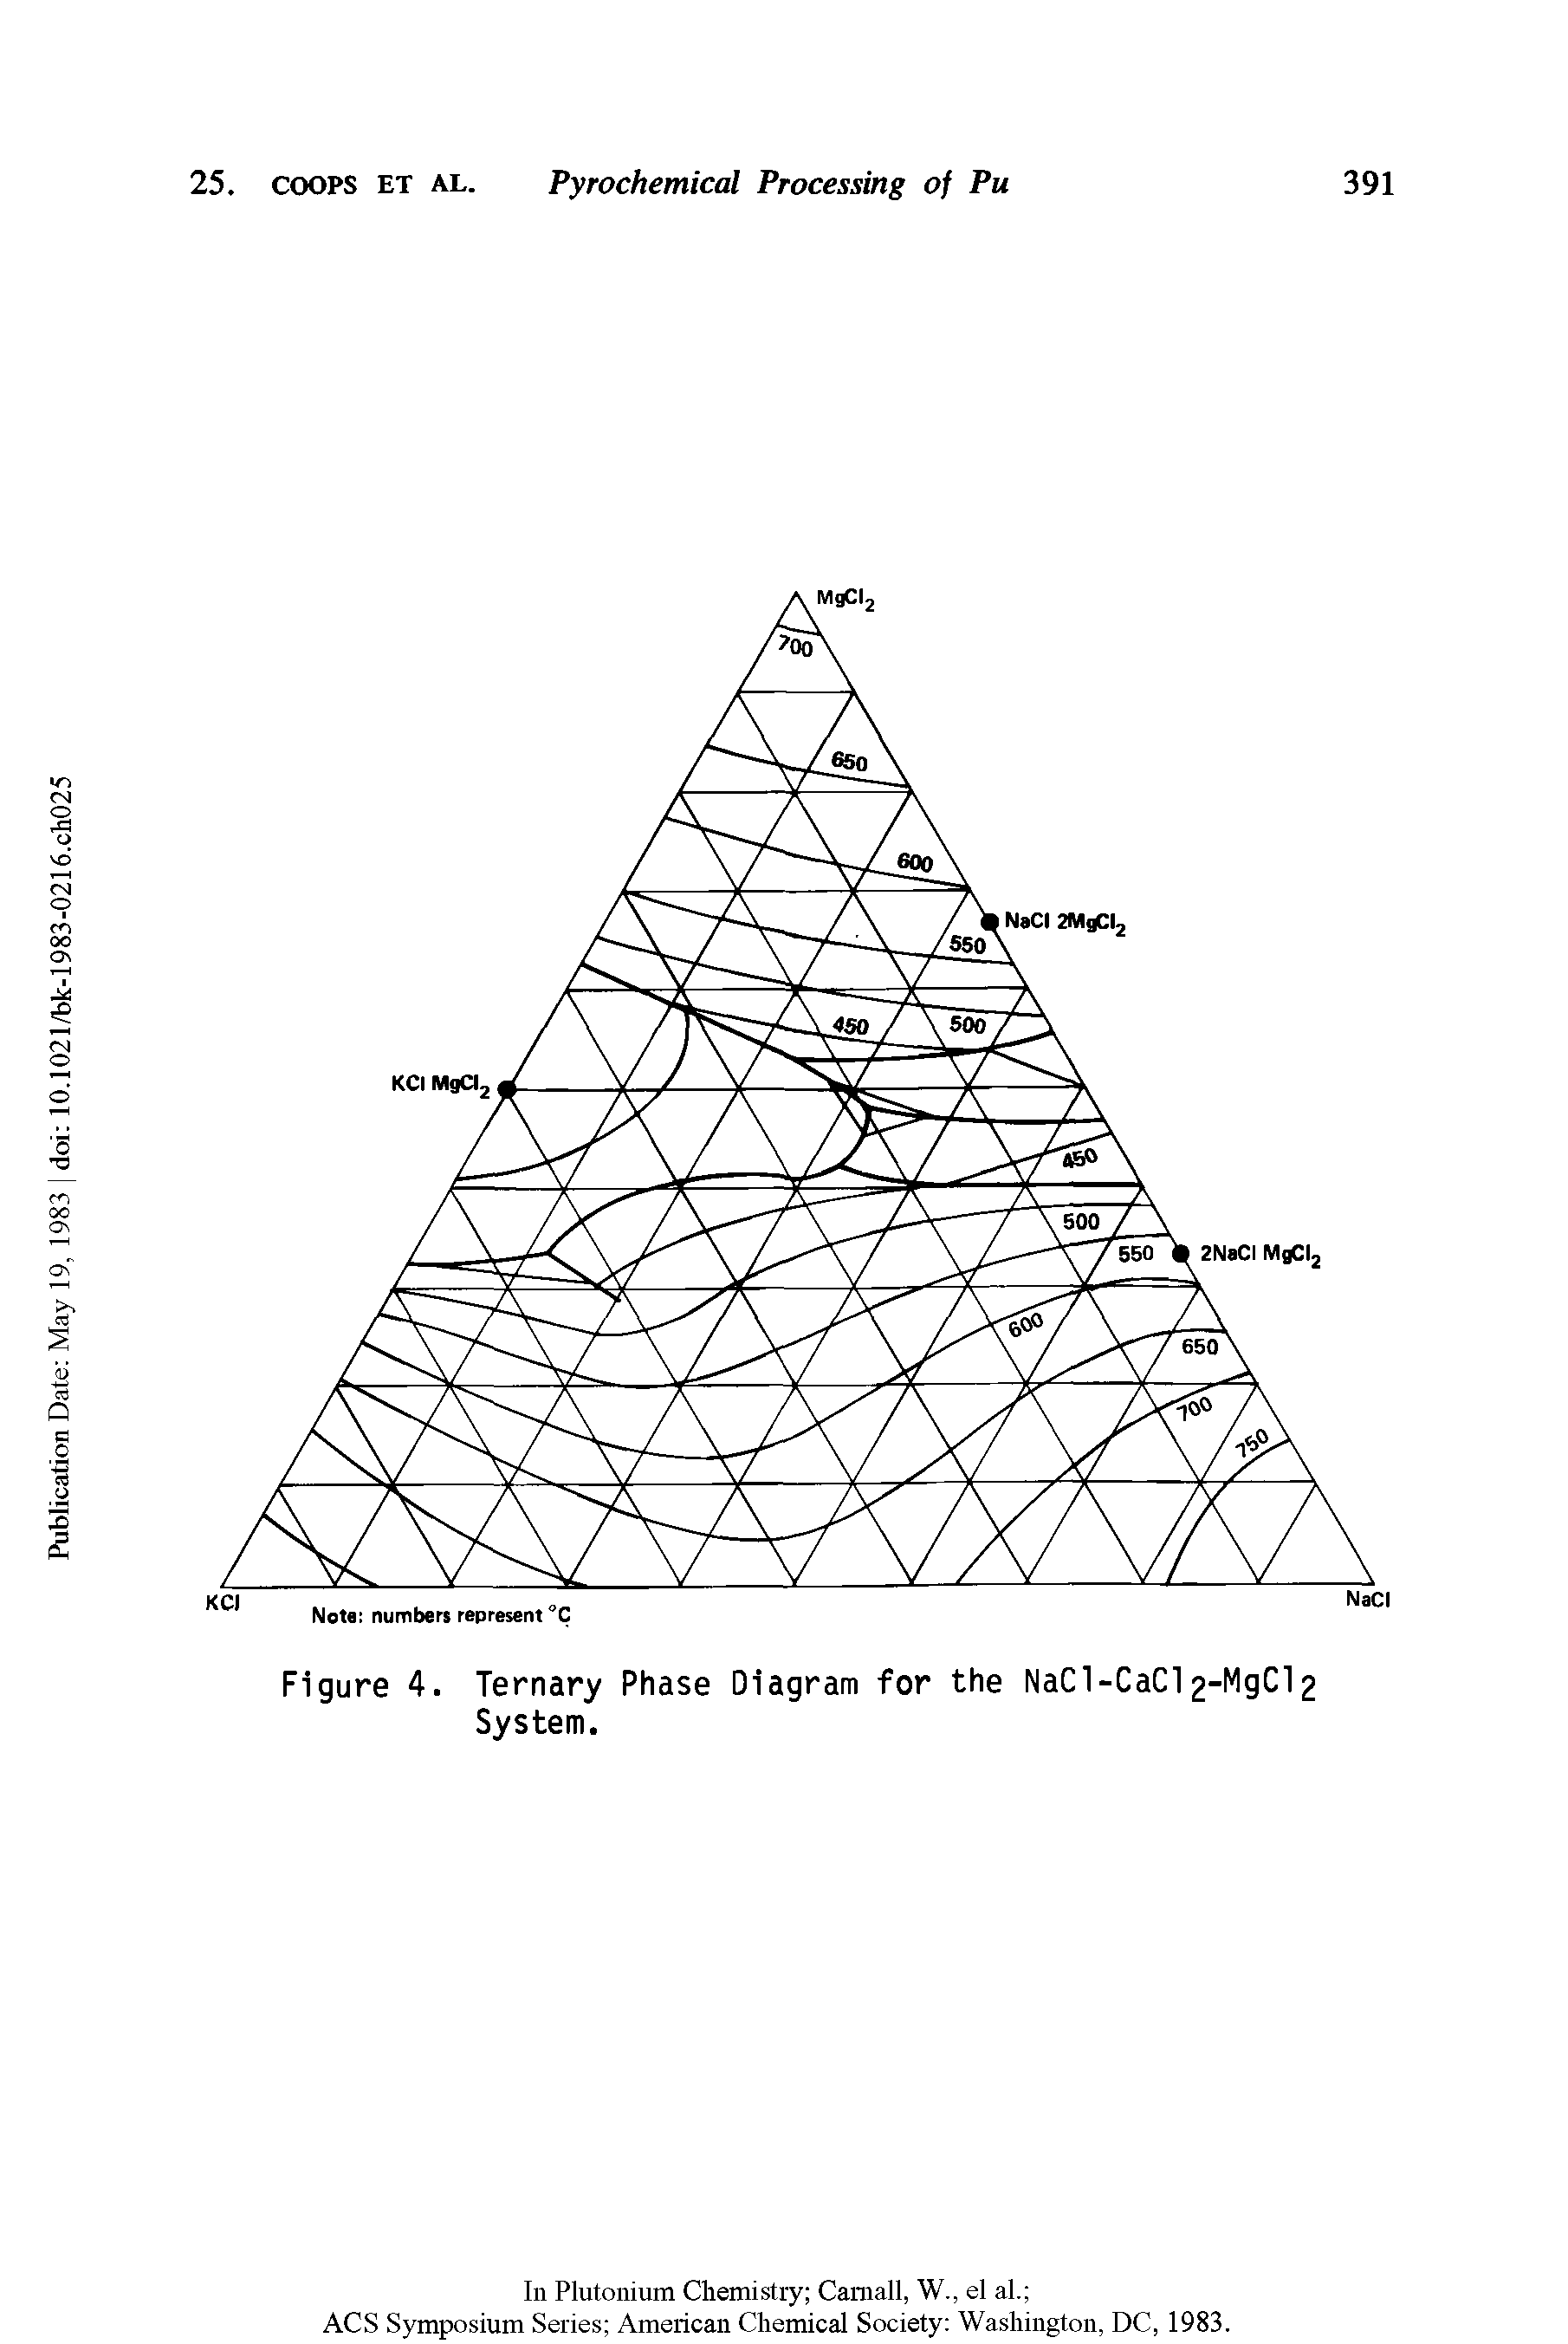 Figure 4. Ternary Phase Diagram for the NaCI-CaCi2-MgCl2 System.